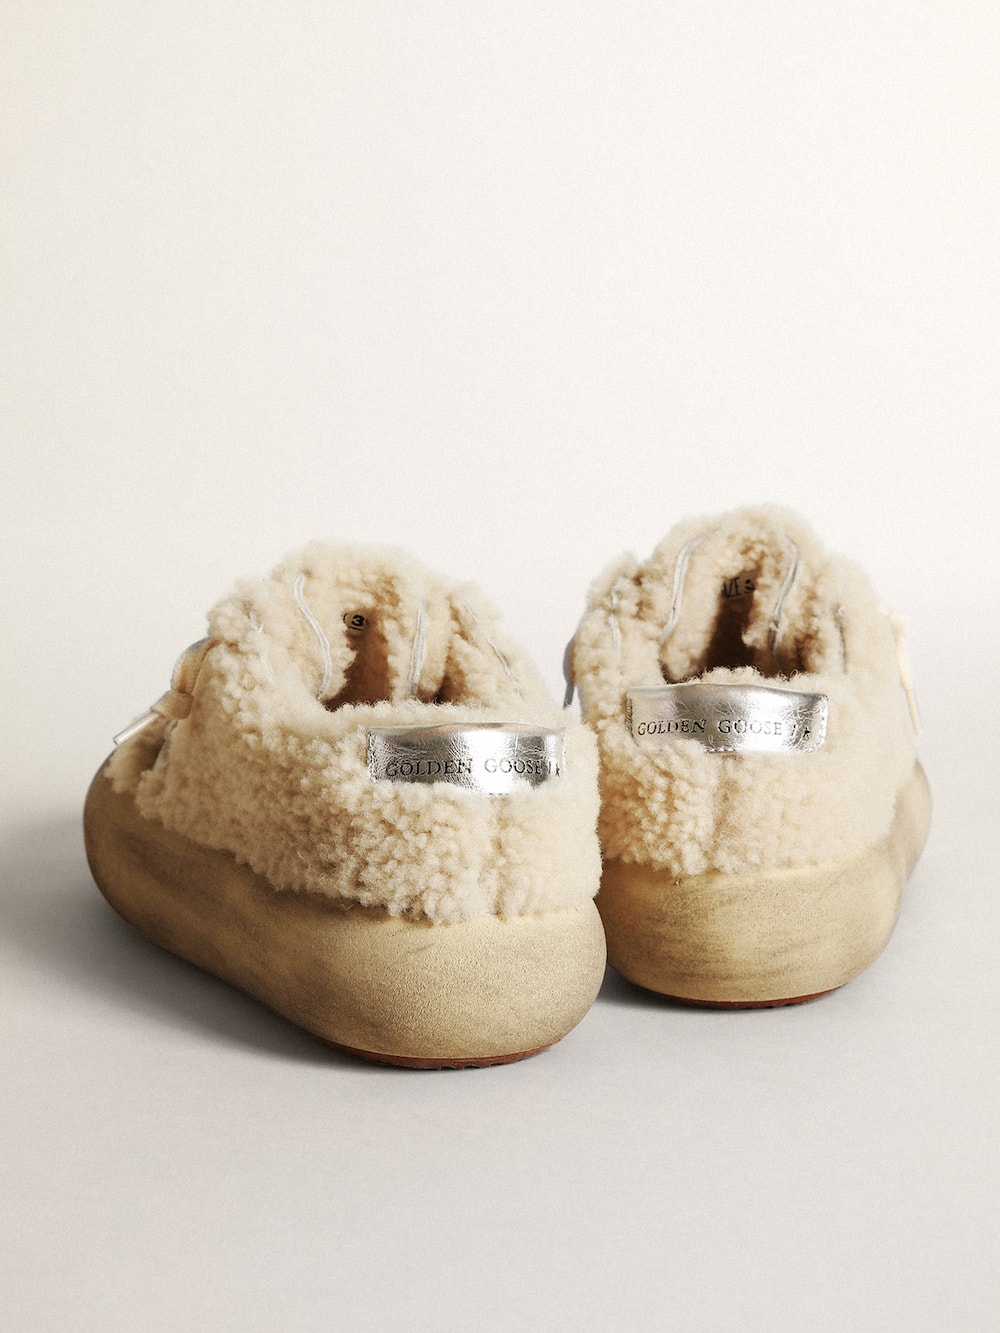 Golden Goose - Women’s Space-Star shoes in beige shearling with white leather star and metallic leather heel tab in 